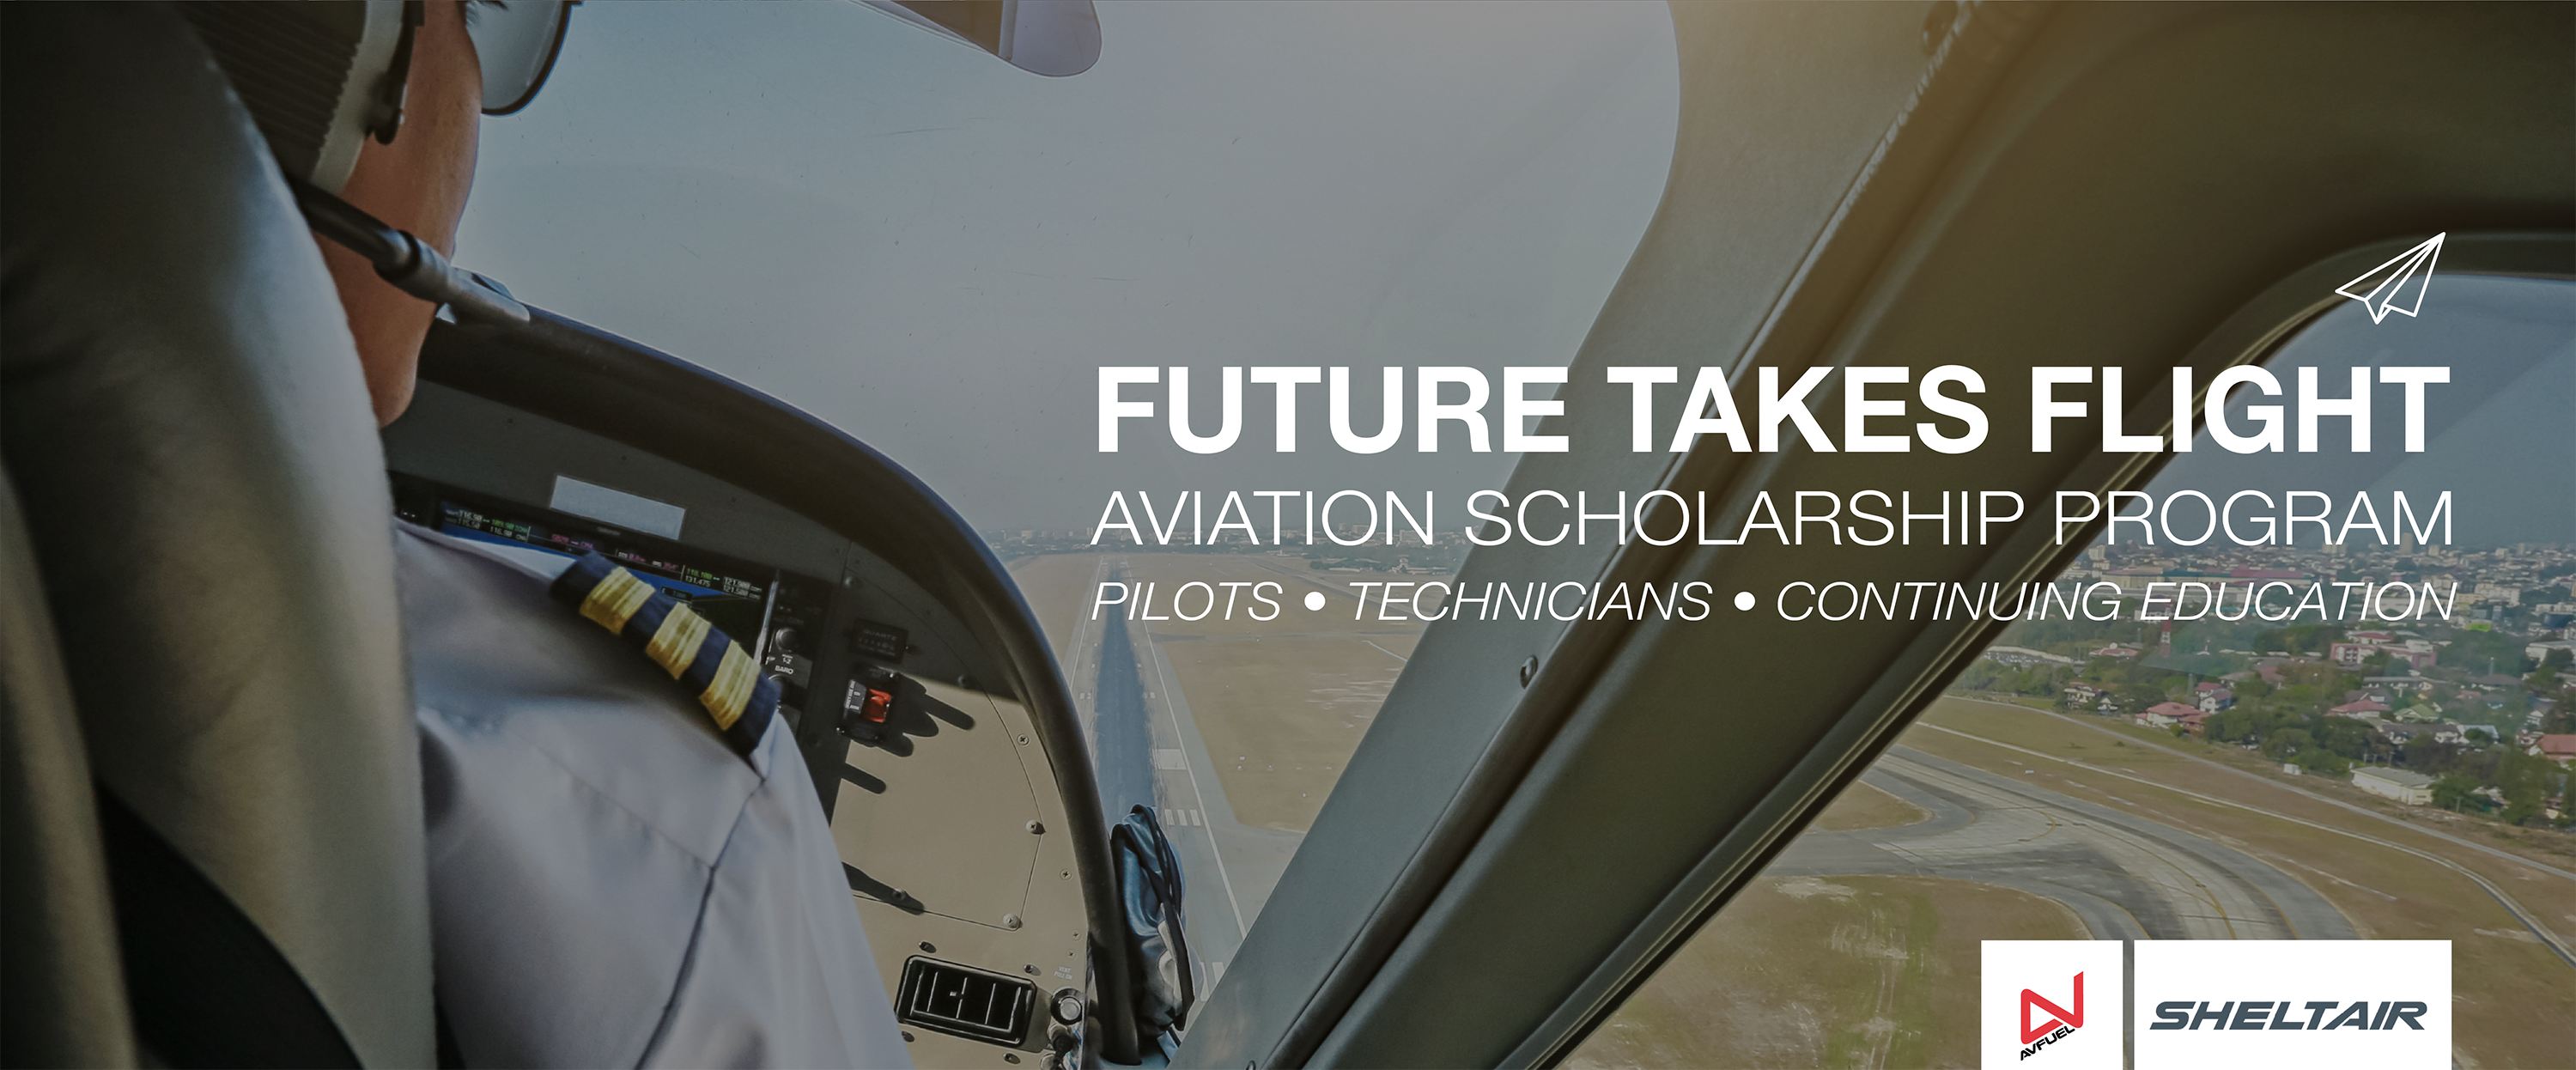 Sheltair and Avfuel: Future Takes Flight 